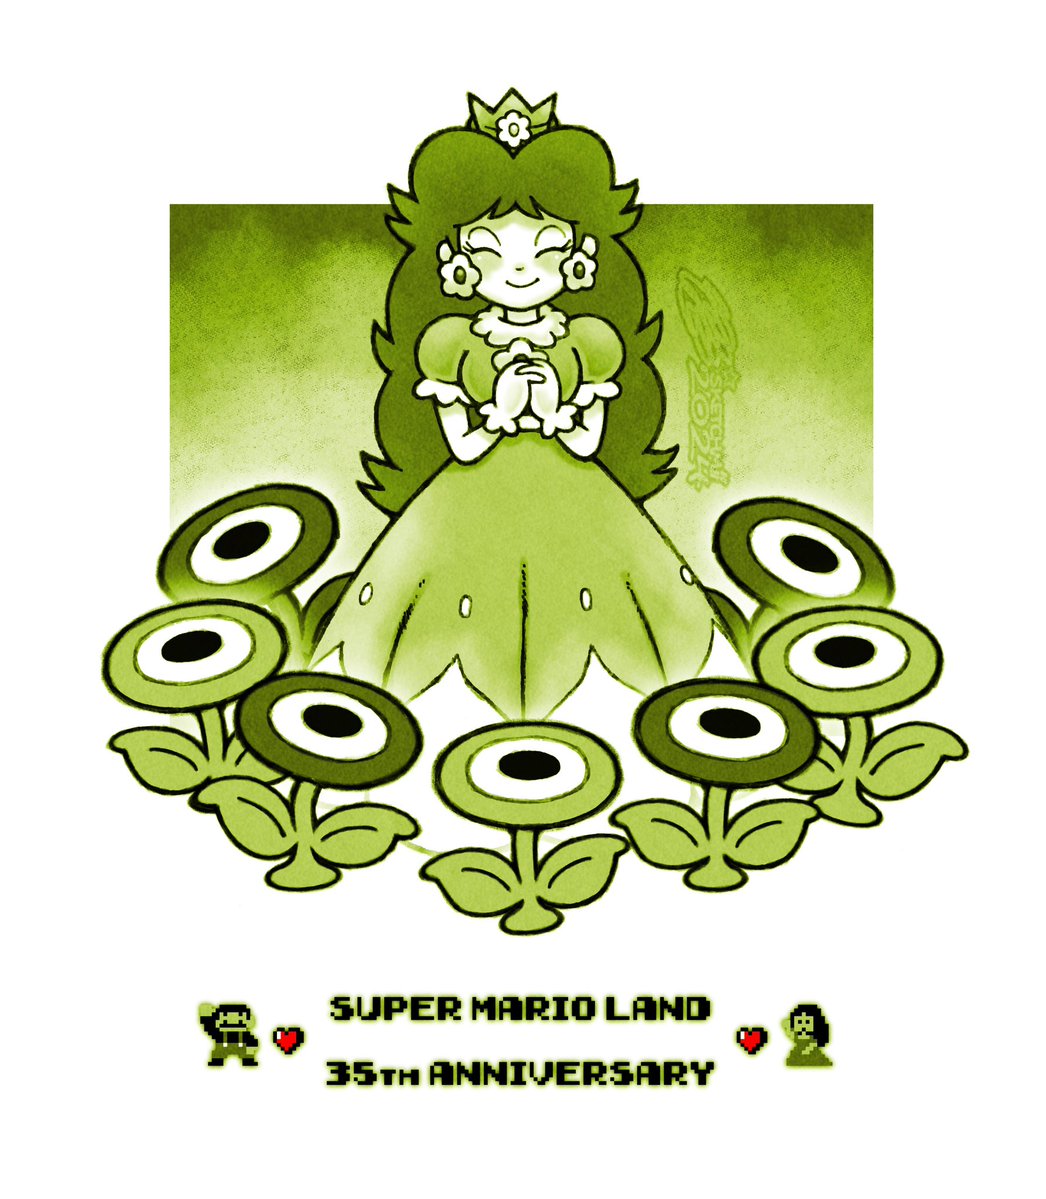 🌼~OH DAISY, Happy Anniversary~🌼

Be sure to give the Gameboy Queen a special celebration~! 

#SuperMario #スーパーマリオ #SuperMarioLand #スーパーマリオランド #PrincessDaisy #デイジー姫 #GAMEBOY